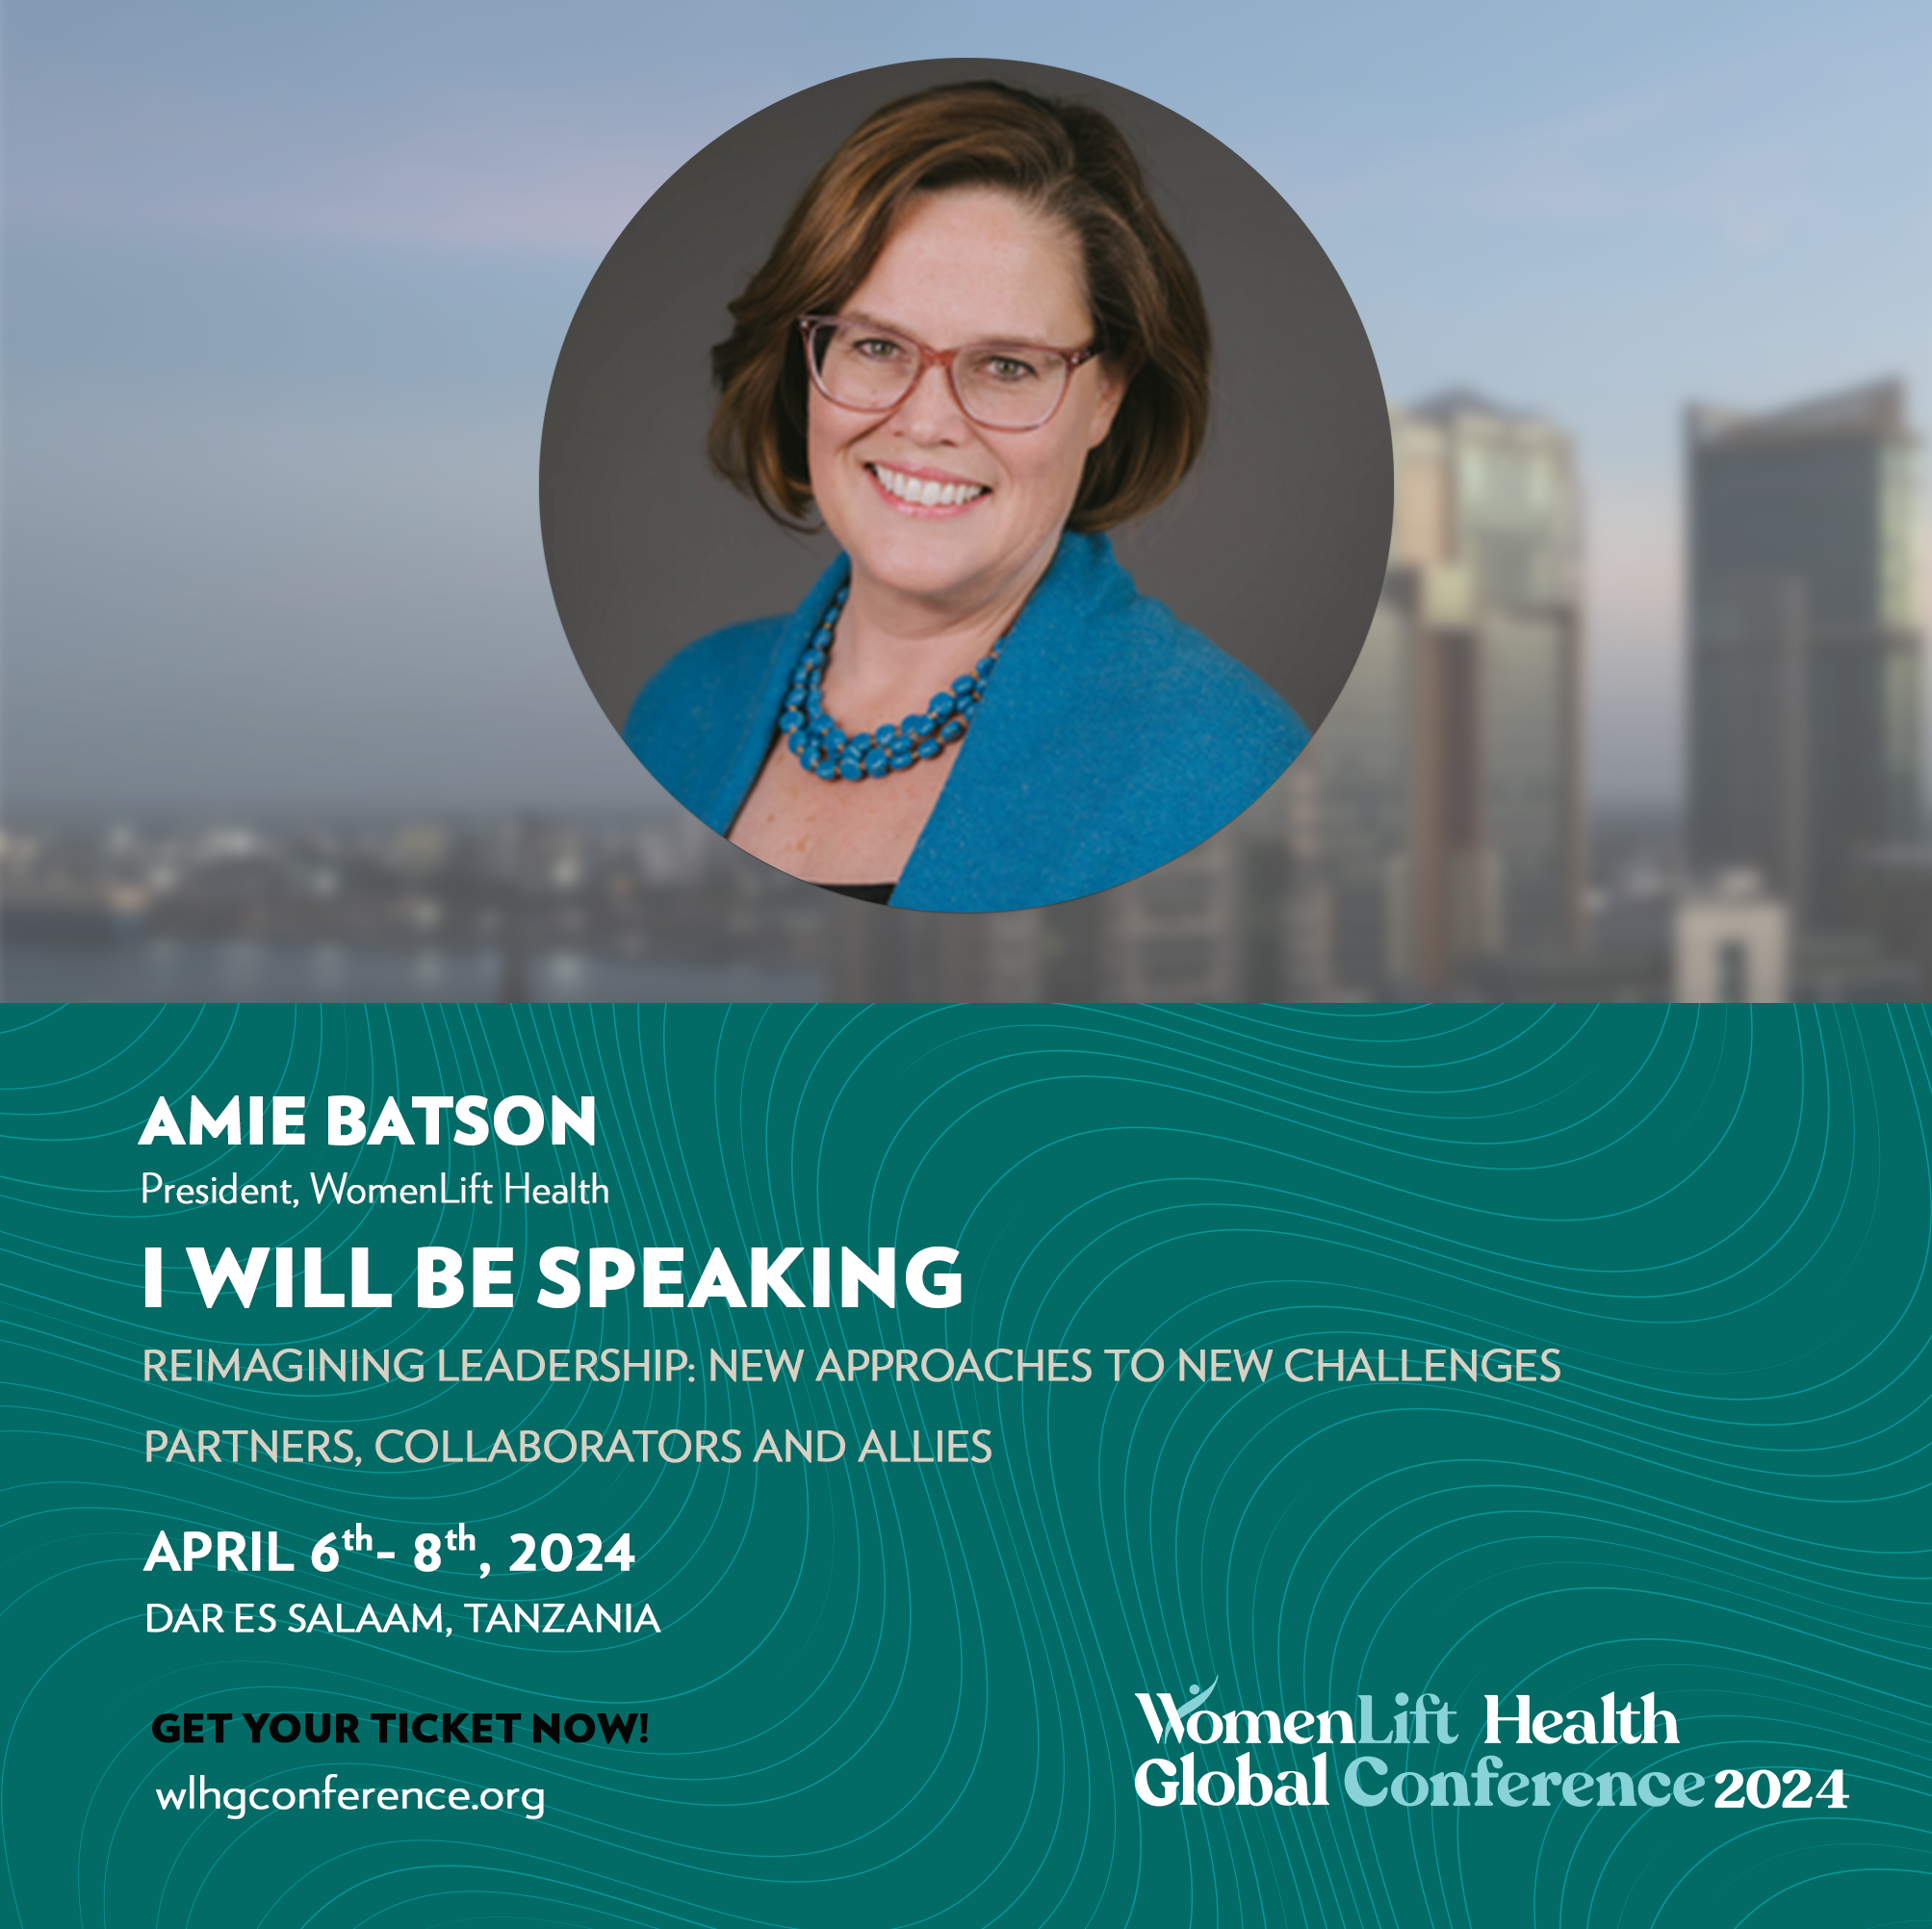 Amie Batson will be speaking at the WomenLift Health Global Conference 2024